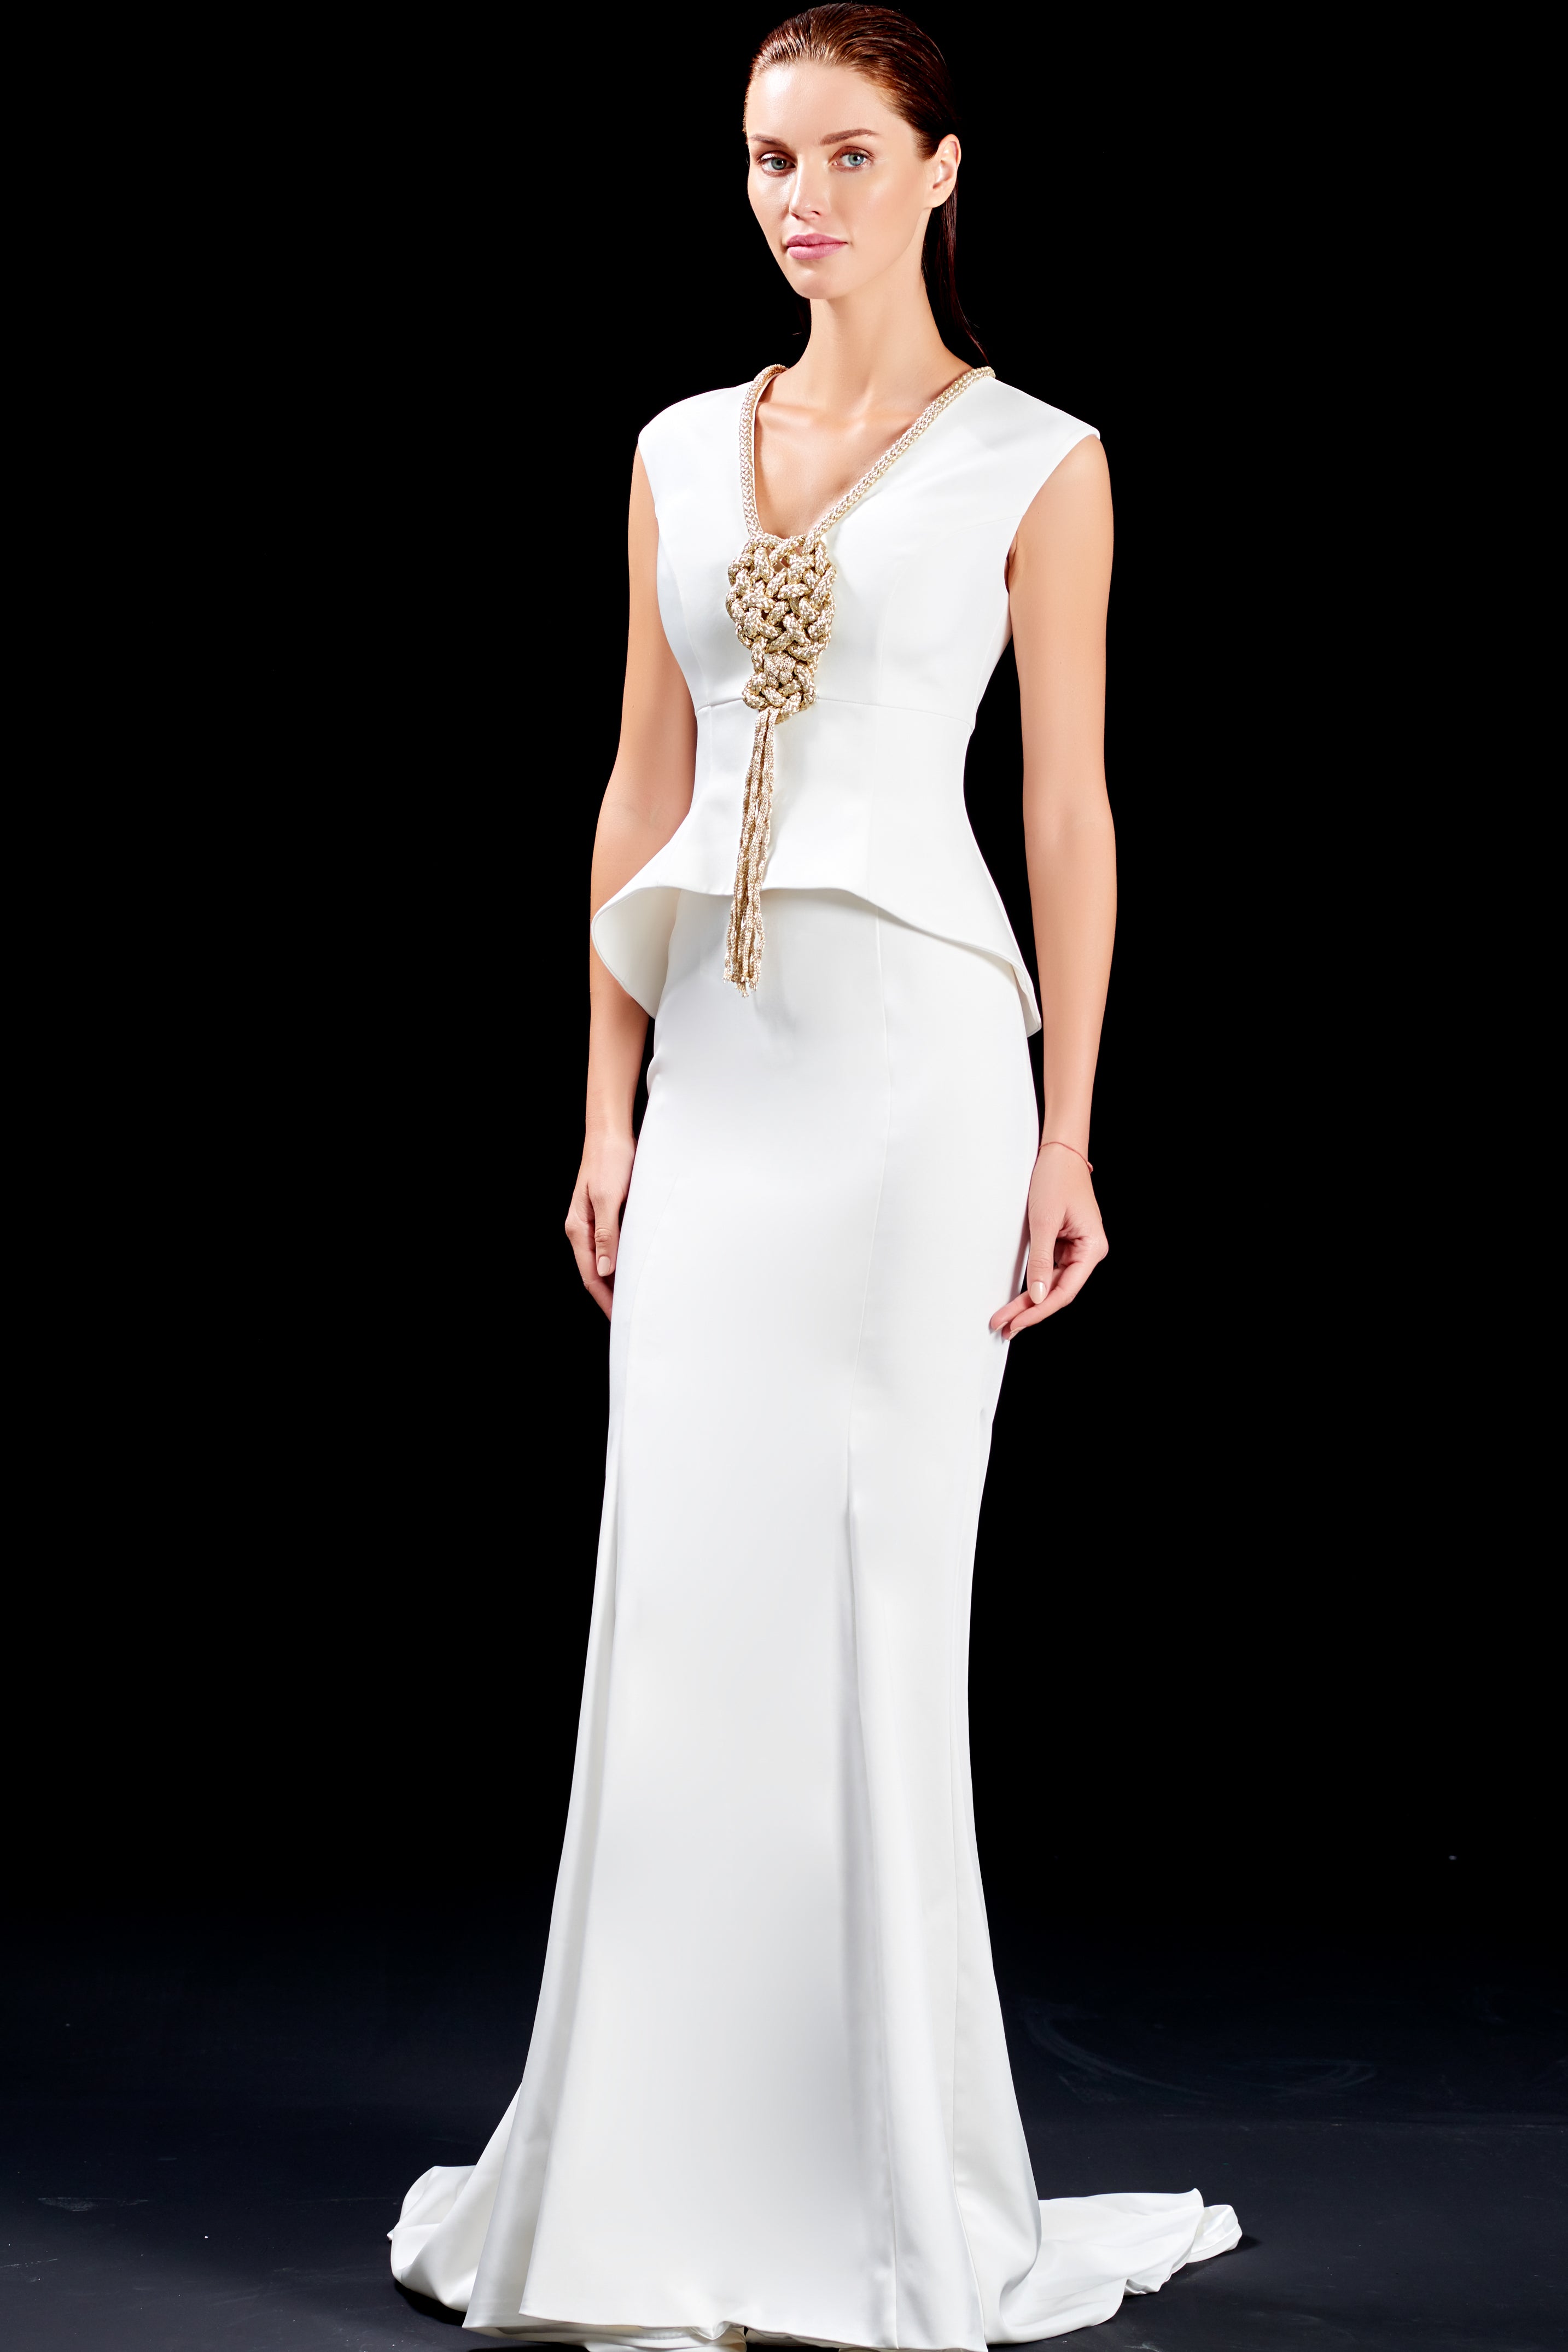 Structured Faille Mermaid Dress with Metallic Knotted Cord